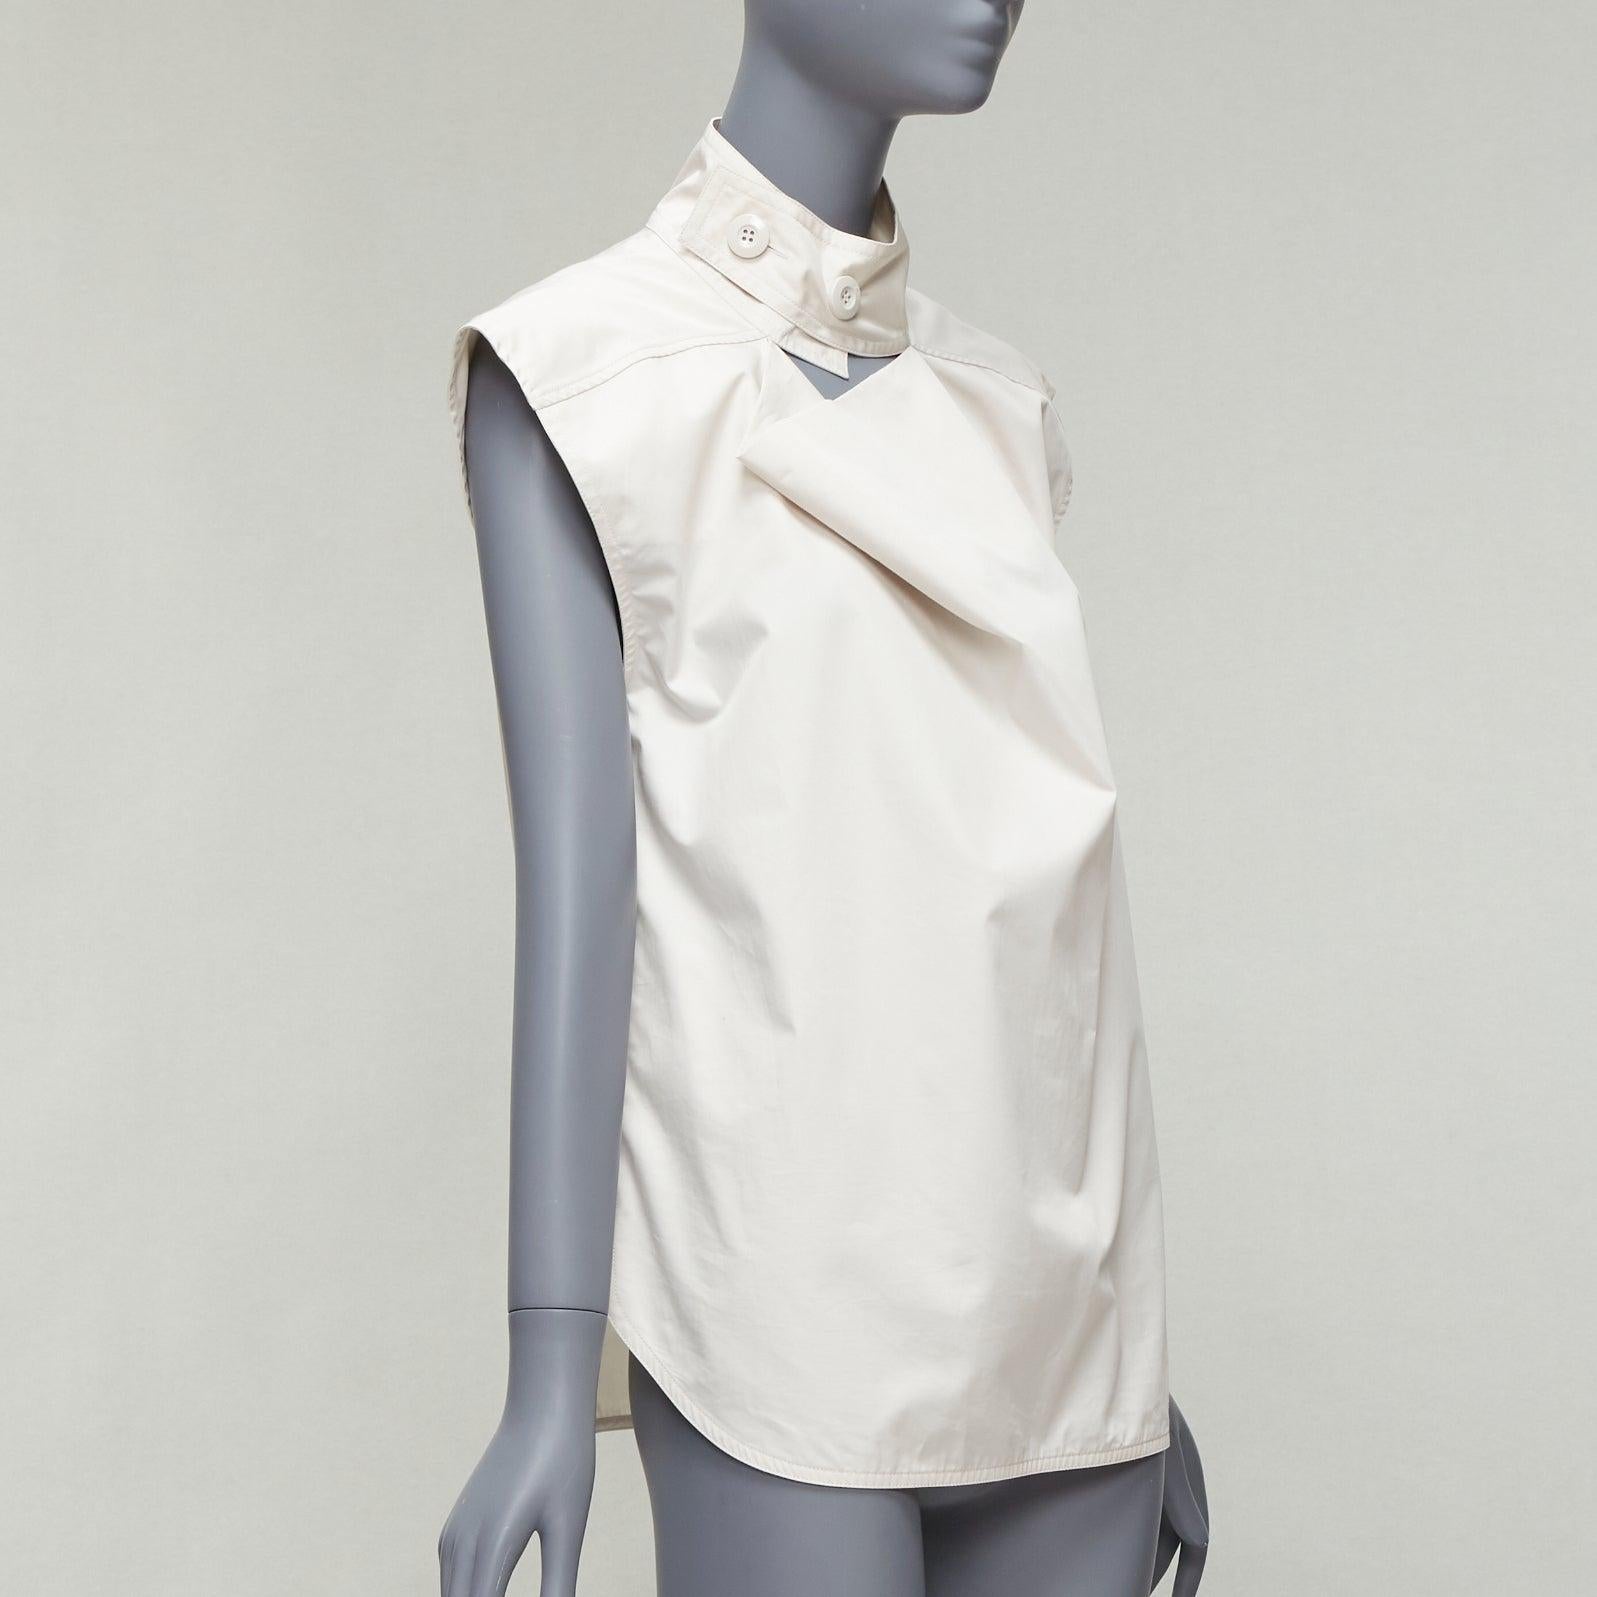 MARNI light grey cotton cut out draped collar boxy utility top IT36 XXS
Reference: CELG/A00325
Brand: Marni
Material: Cotton
Color: Grey
Pattern: Solid
Closure: Button
Extra Details: Button closure at collar. Plain back.
Made in: